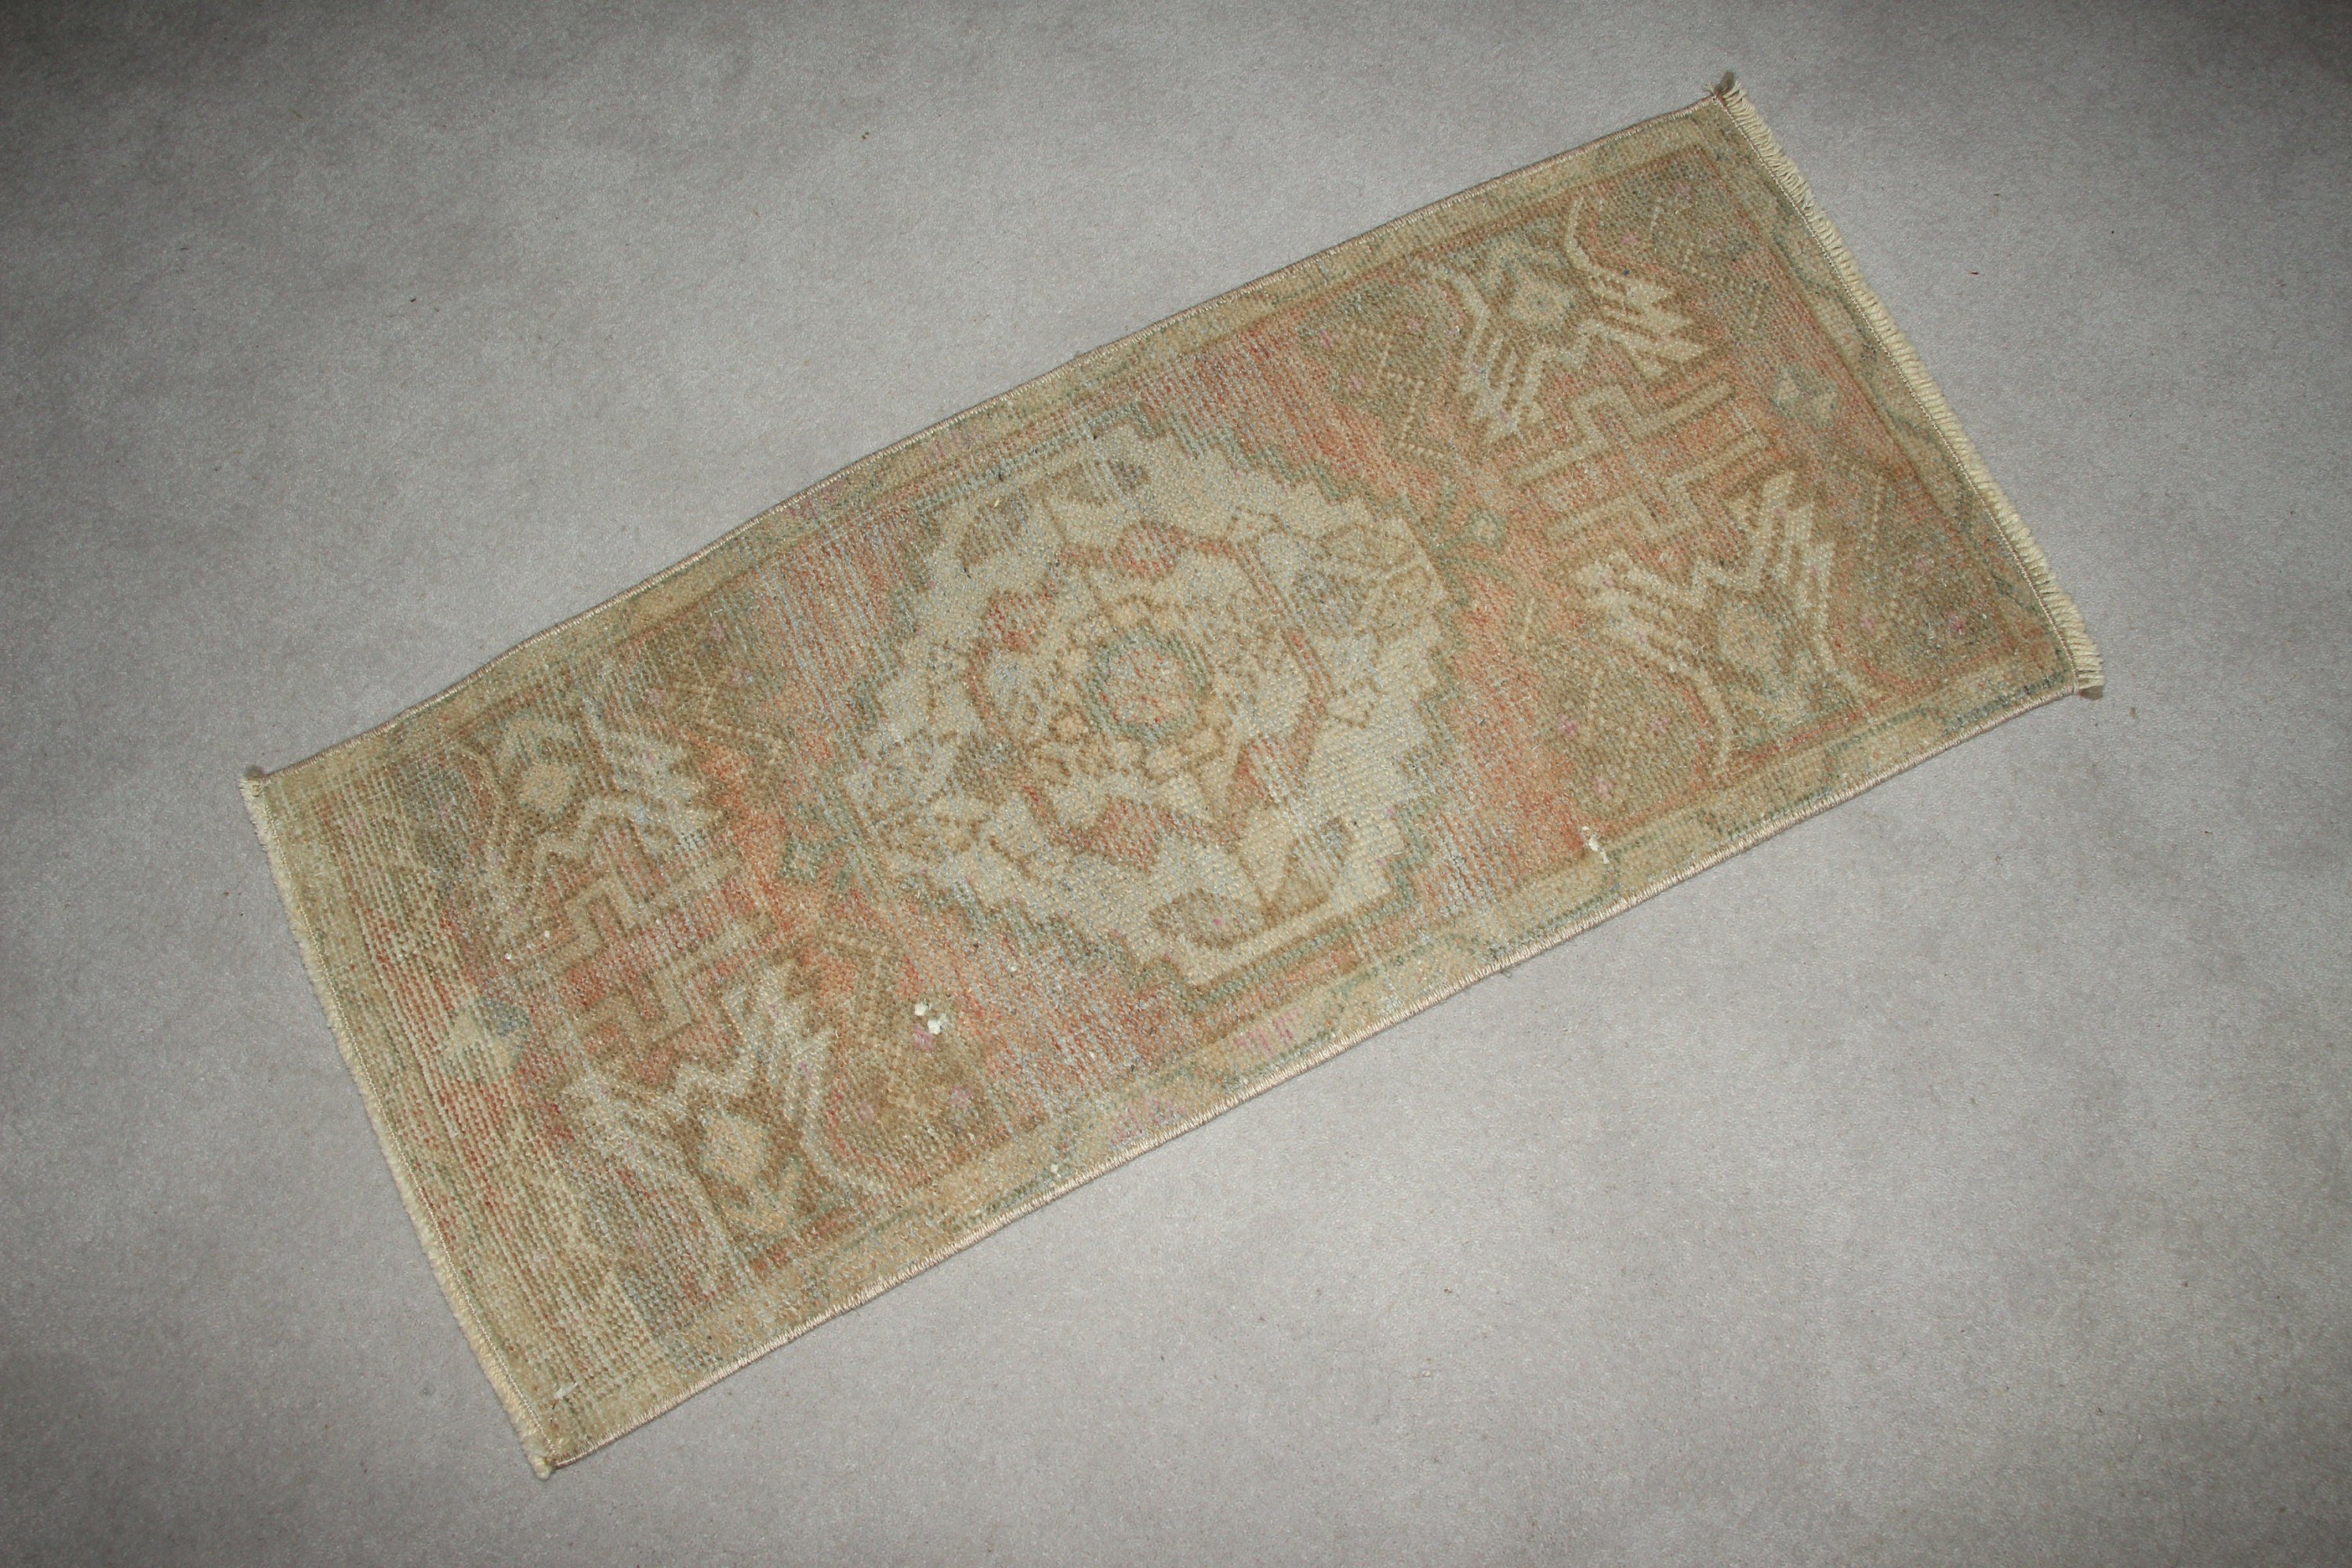 Turkish Rug, Car Mat Rug, Cool Rugs, Dorm Rug, Beige  1.4x3.2 ft Small Rug, Rugs for Wall Hanging, Vintage Rug, Kitchen Rugs